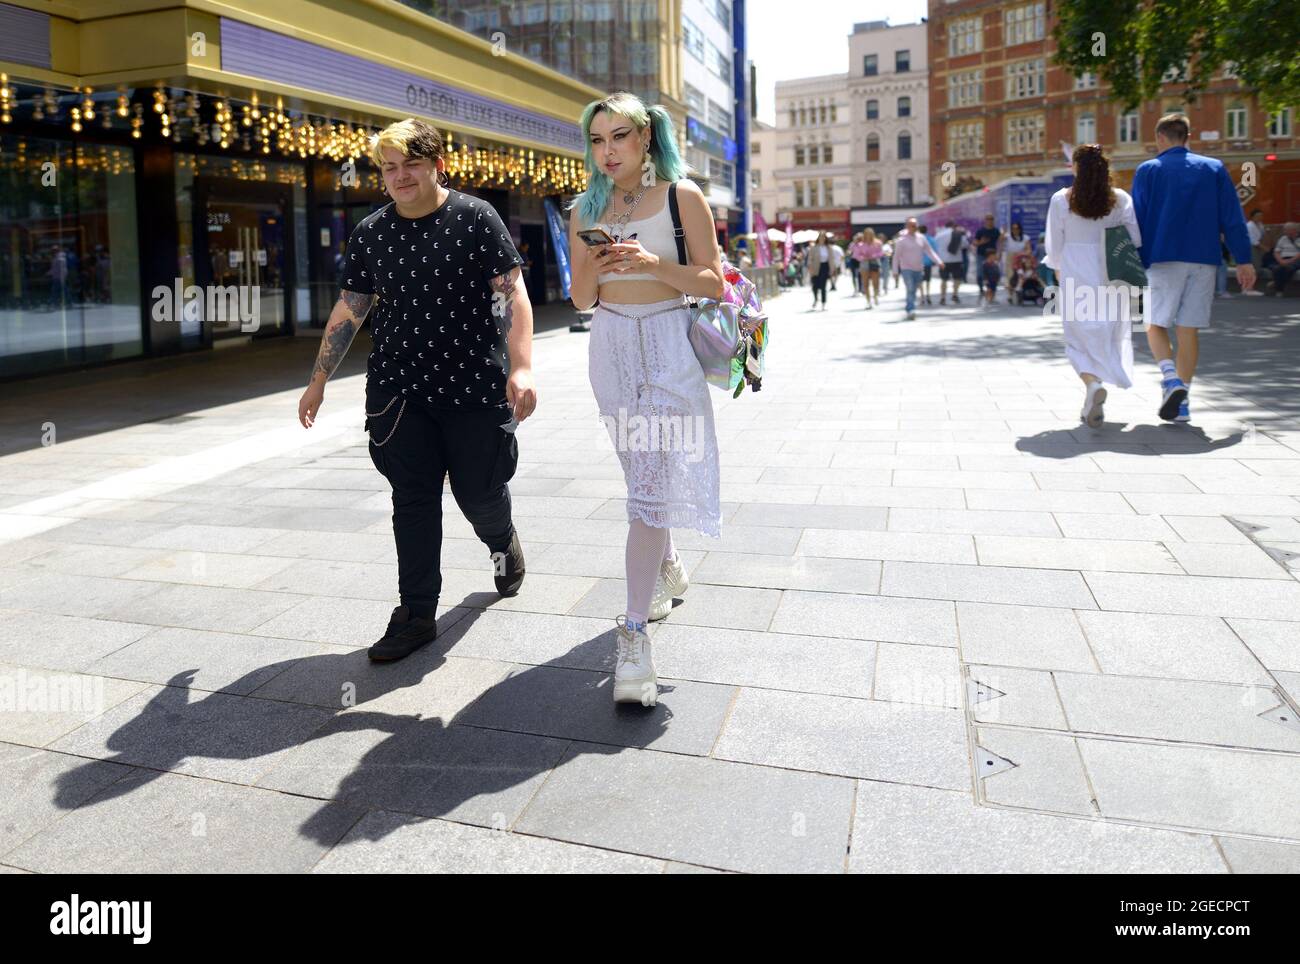 London, England, UK. Young people with distinctive clothes and makeup in Leicester Square Stock Photo